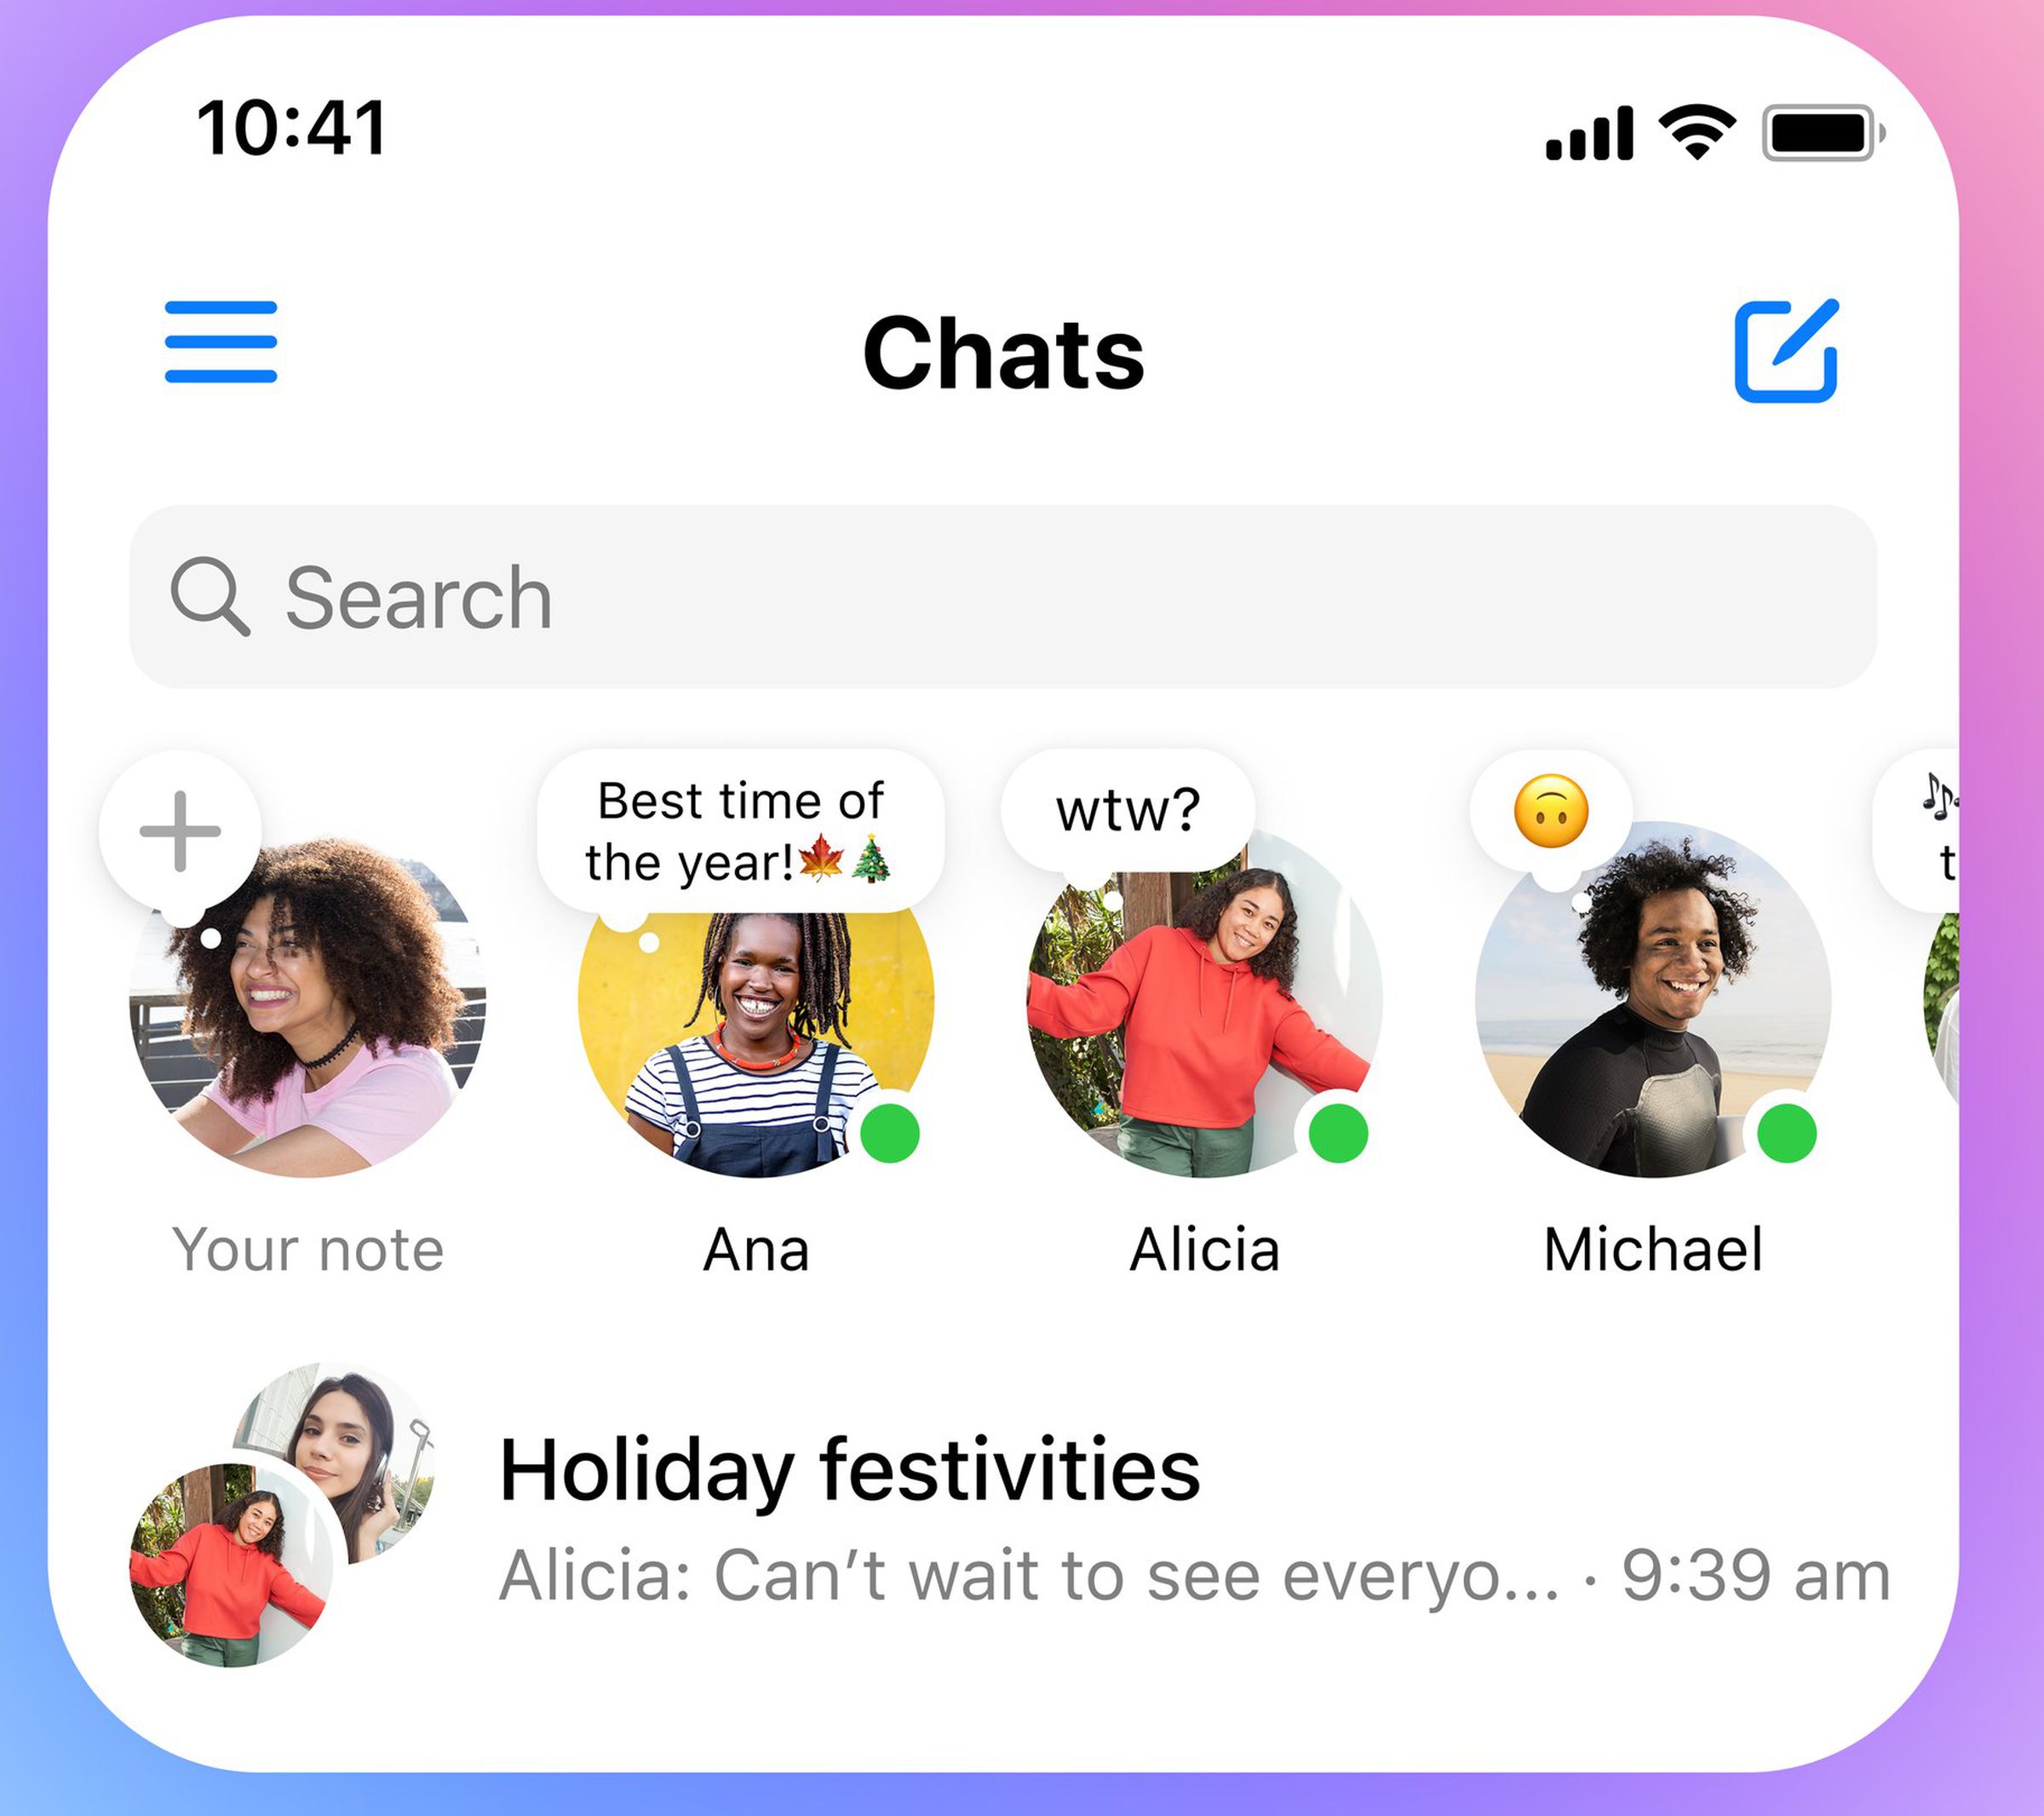 Screenshot of the Messenger app showing icons for online friends with message bubbles over their faces showing their current status posted as a note. One nmaed Ana is telling her friends “Best time of the Year!, while Alicia posts “wtw?” abd Michael’s note is an upside down smiley face emoji.